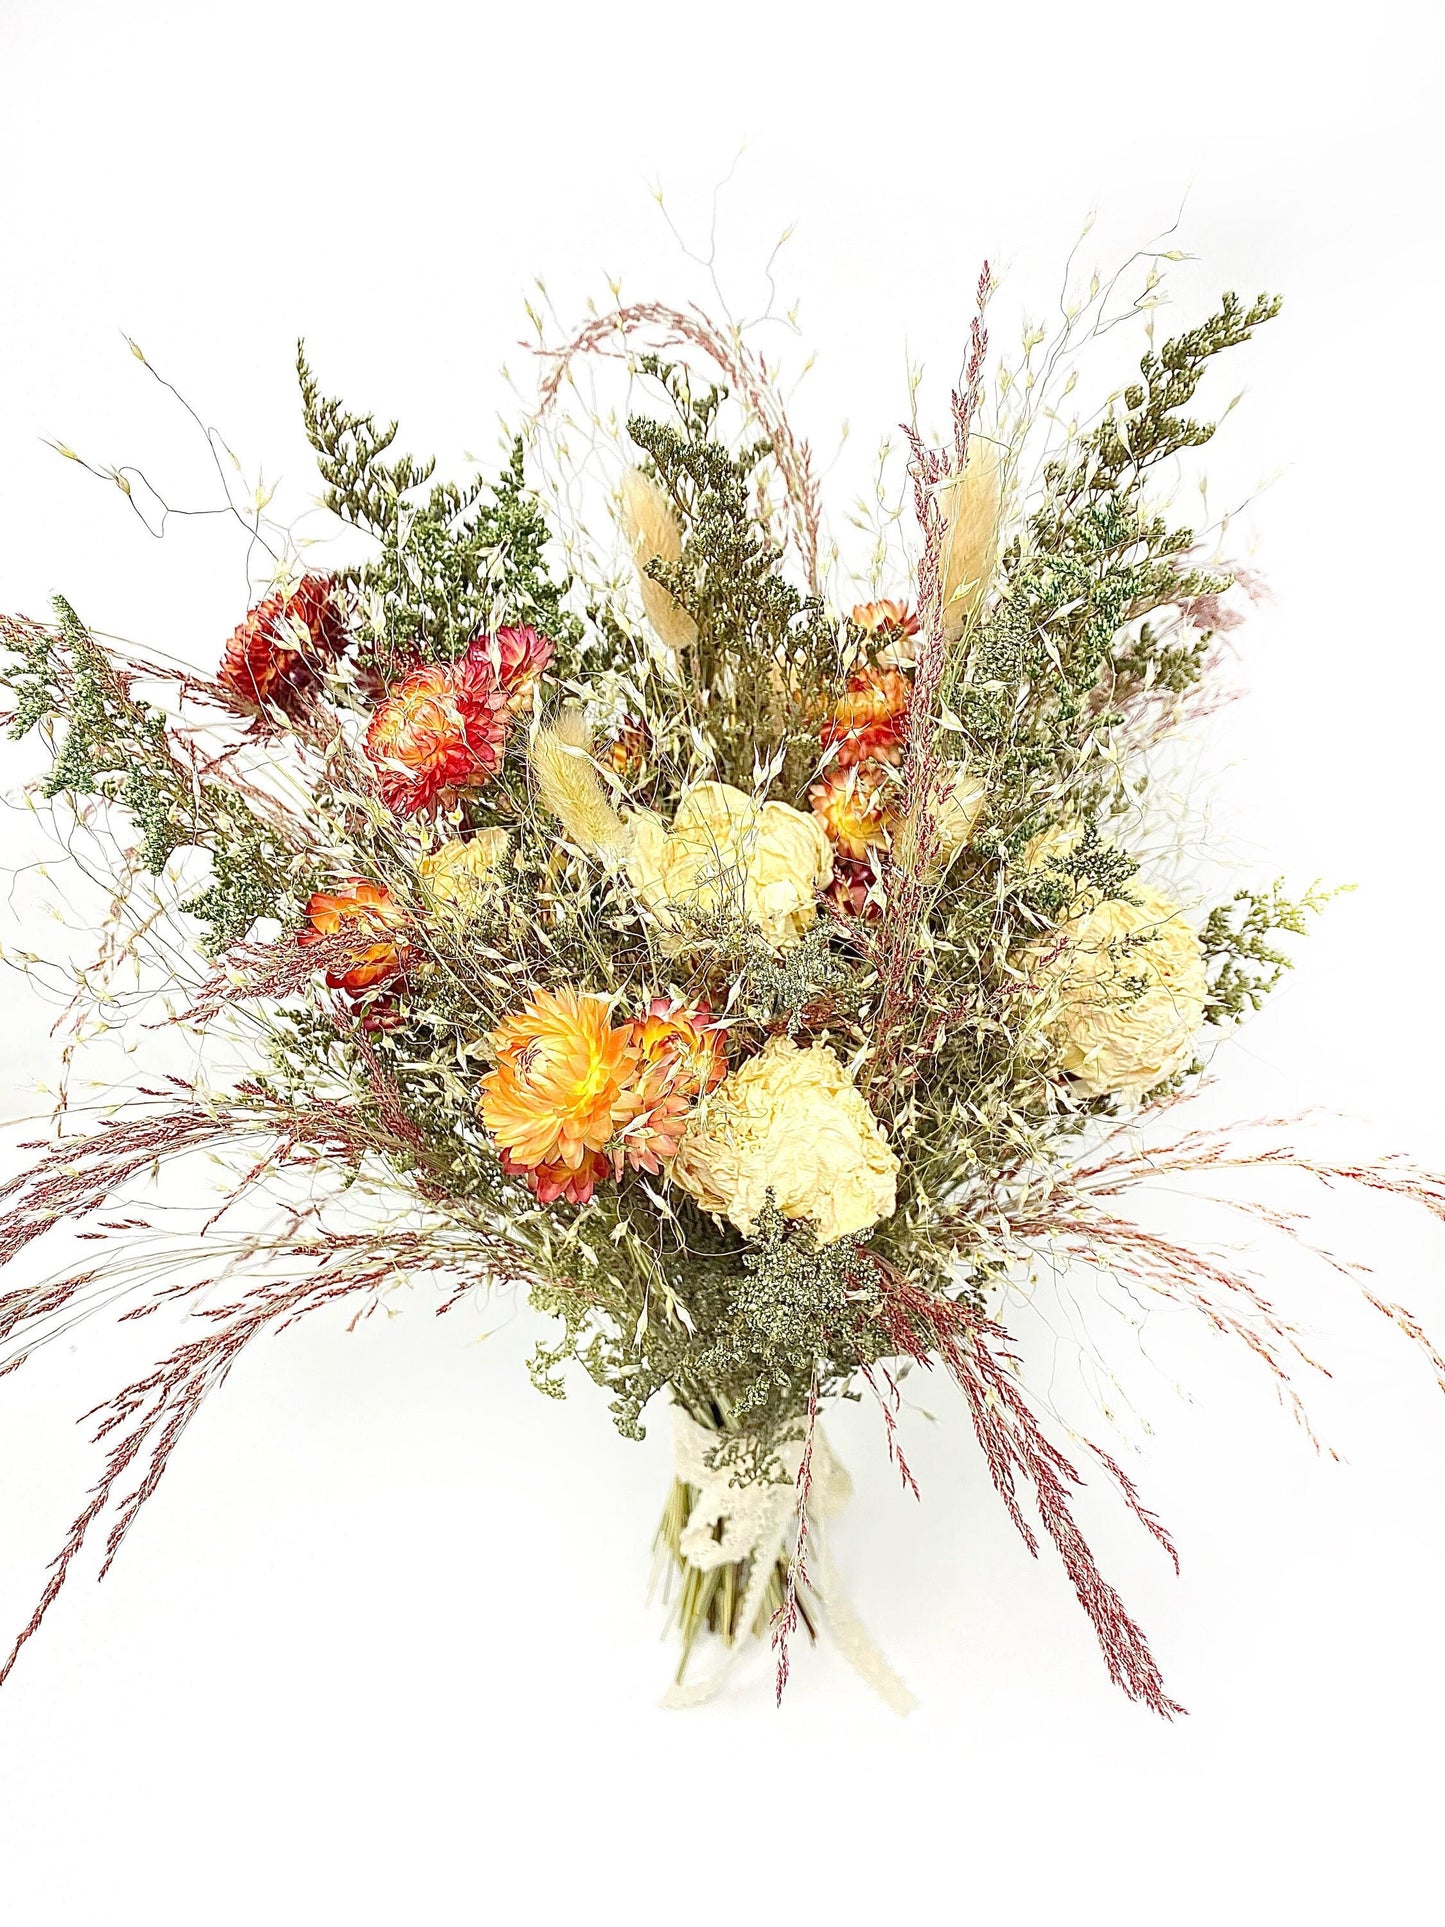 Wedding Bouquet, Dried Flowers, Strawflowers, Preserved Floral, Bridal, Ribbon, Peonies, Simple, Green and White, Bunny Tails, Red Silk